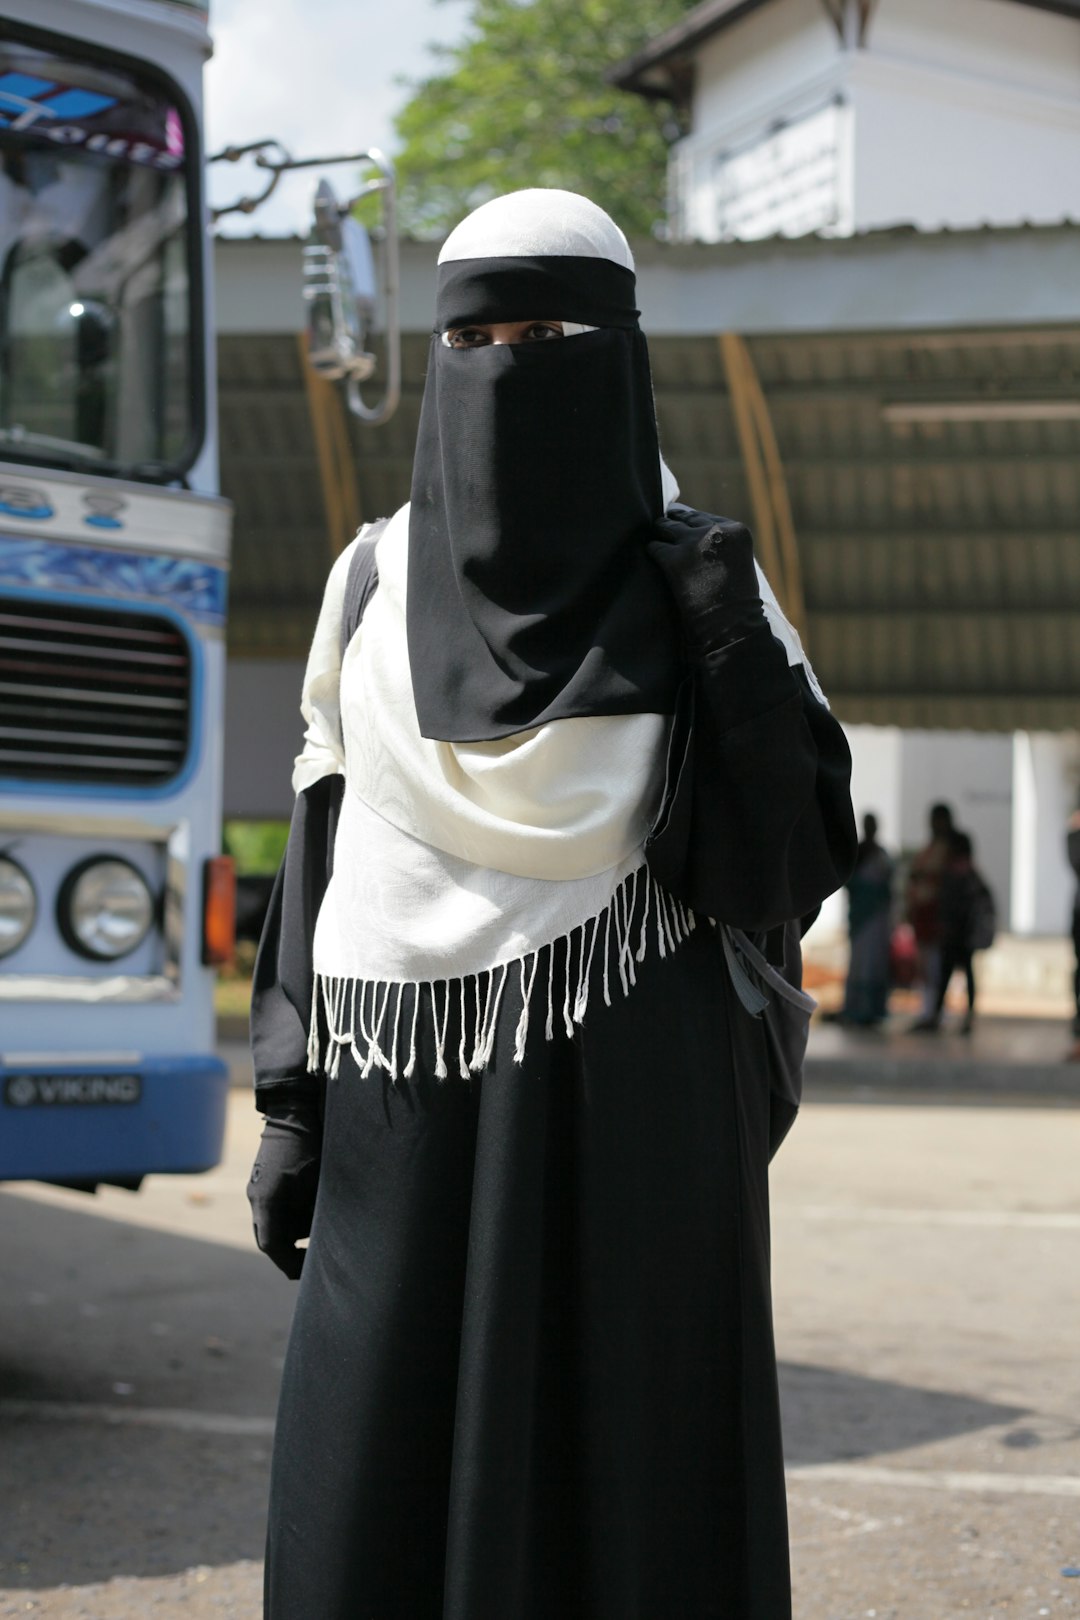 woman in white hijab and black abaya standing on street during daytime